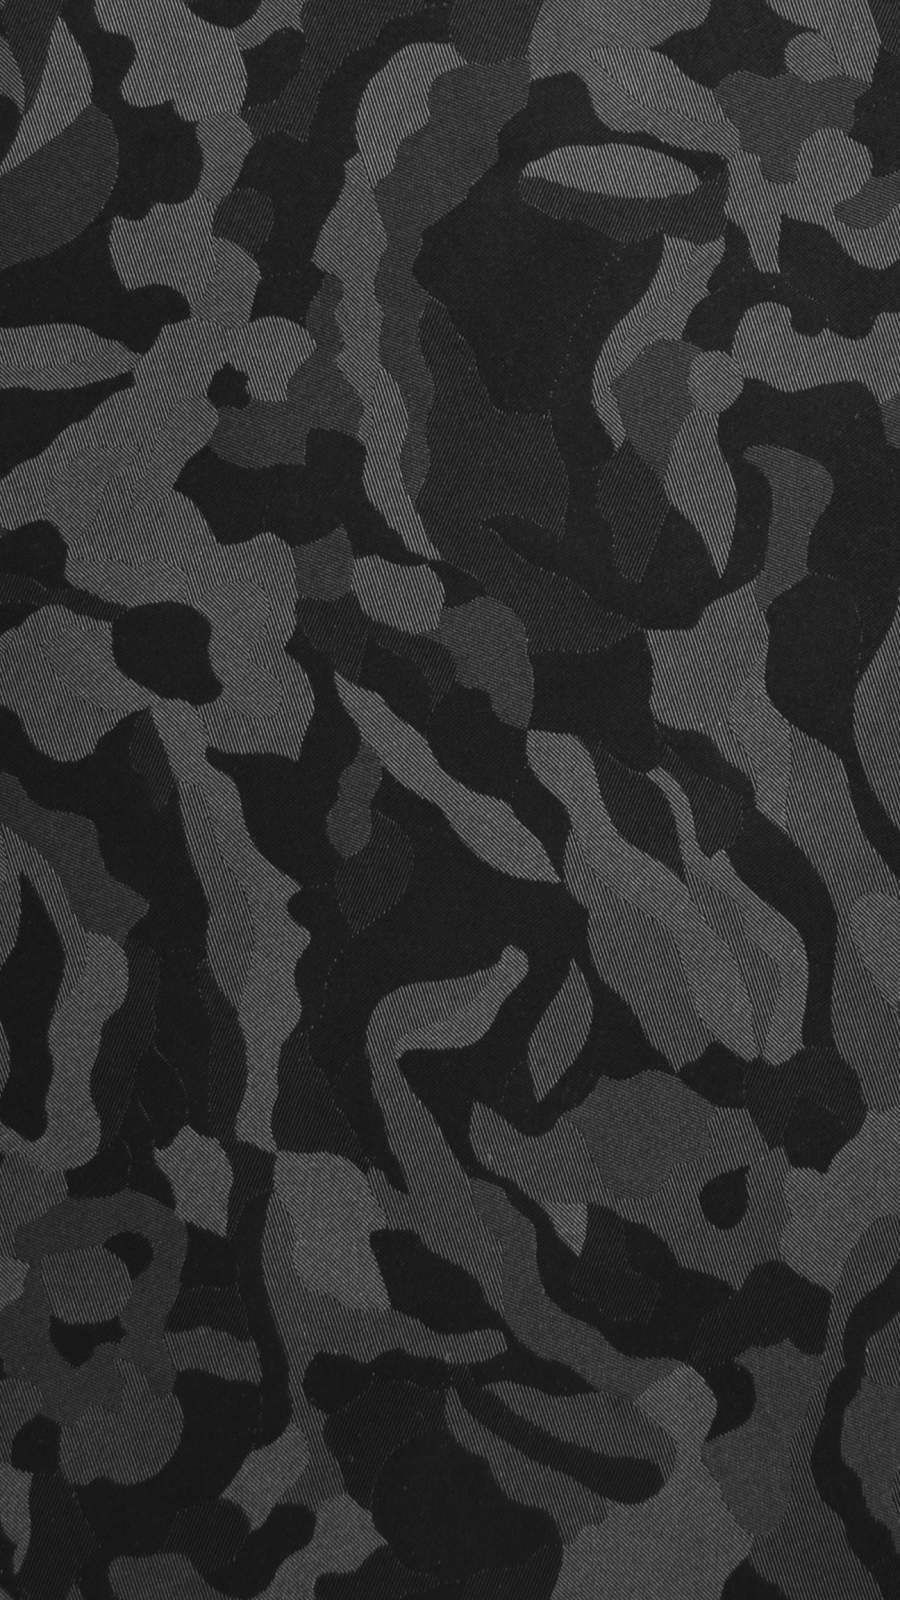 Black Camouflage iPhone Wallpaper   iPhone Wallpapers Camouflage